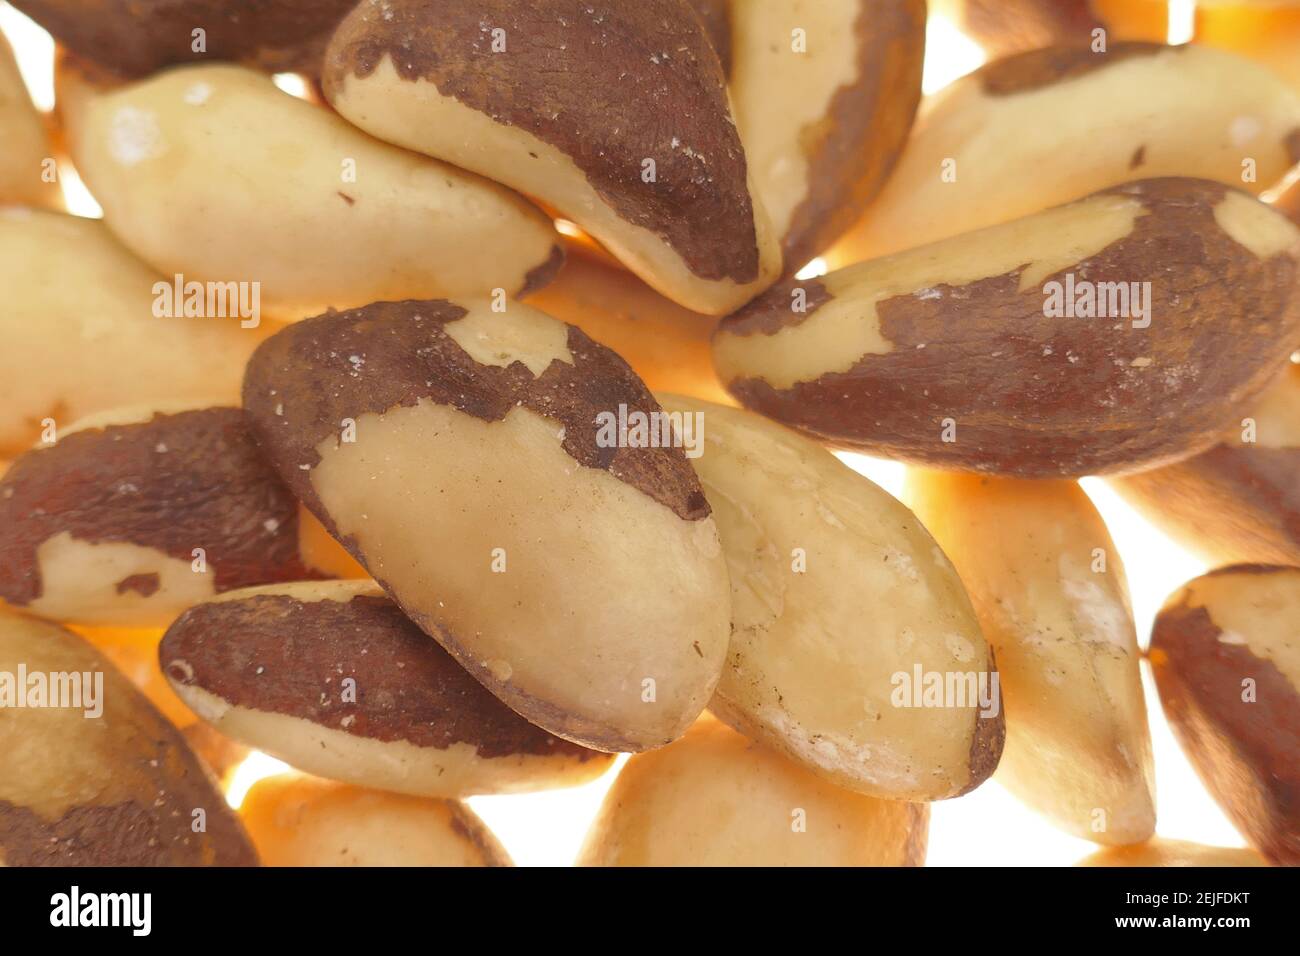 Brazil nut close-up on white background.Healthy fats. Nuts and seeds. A healthy snack. Healthy fats and proteins. Vegan Vegetarian Food  Stock Photo